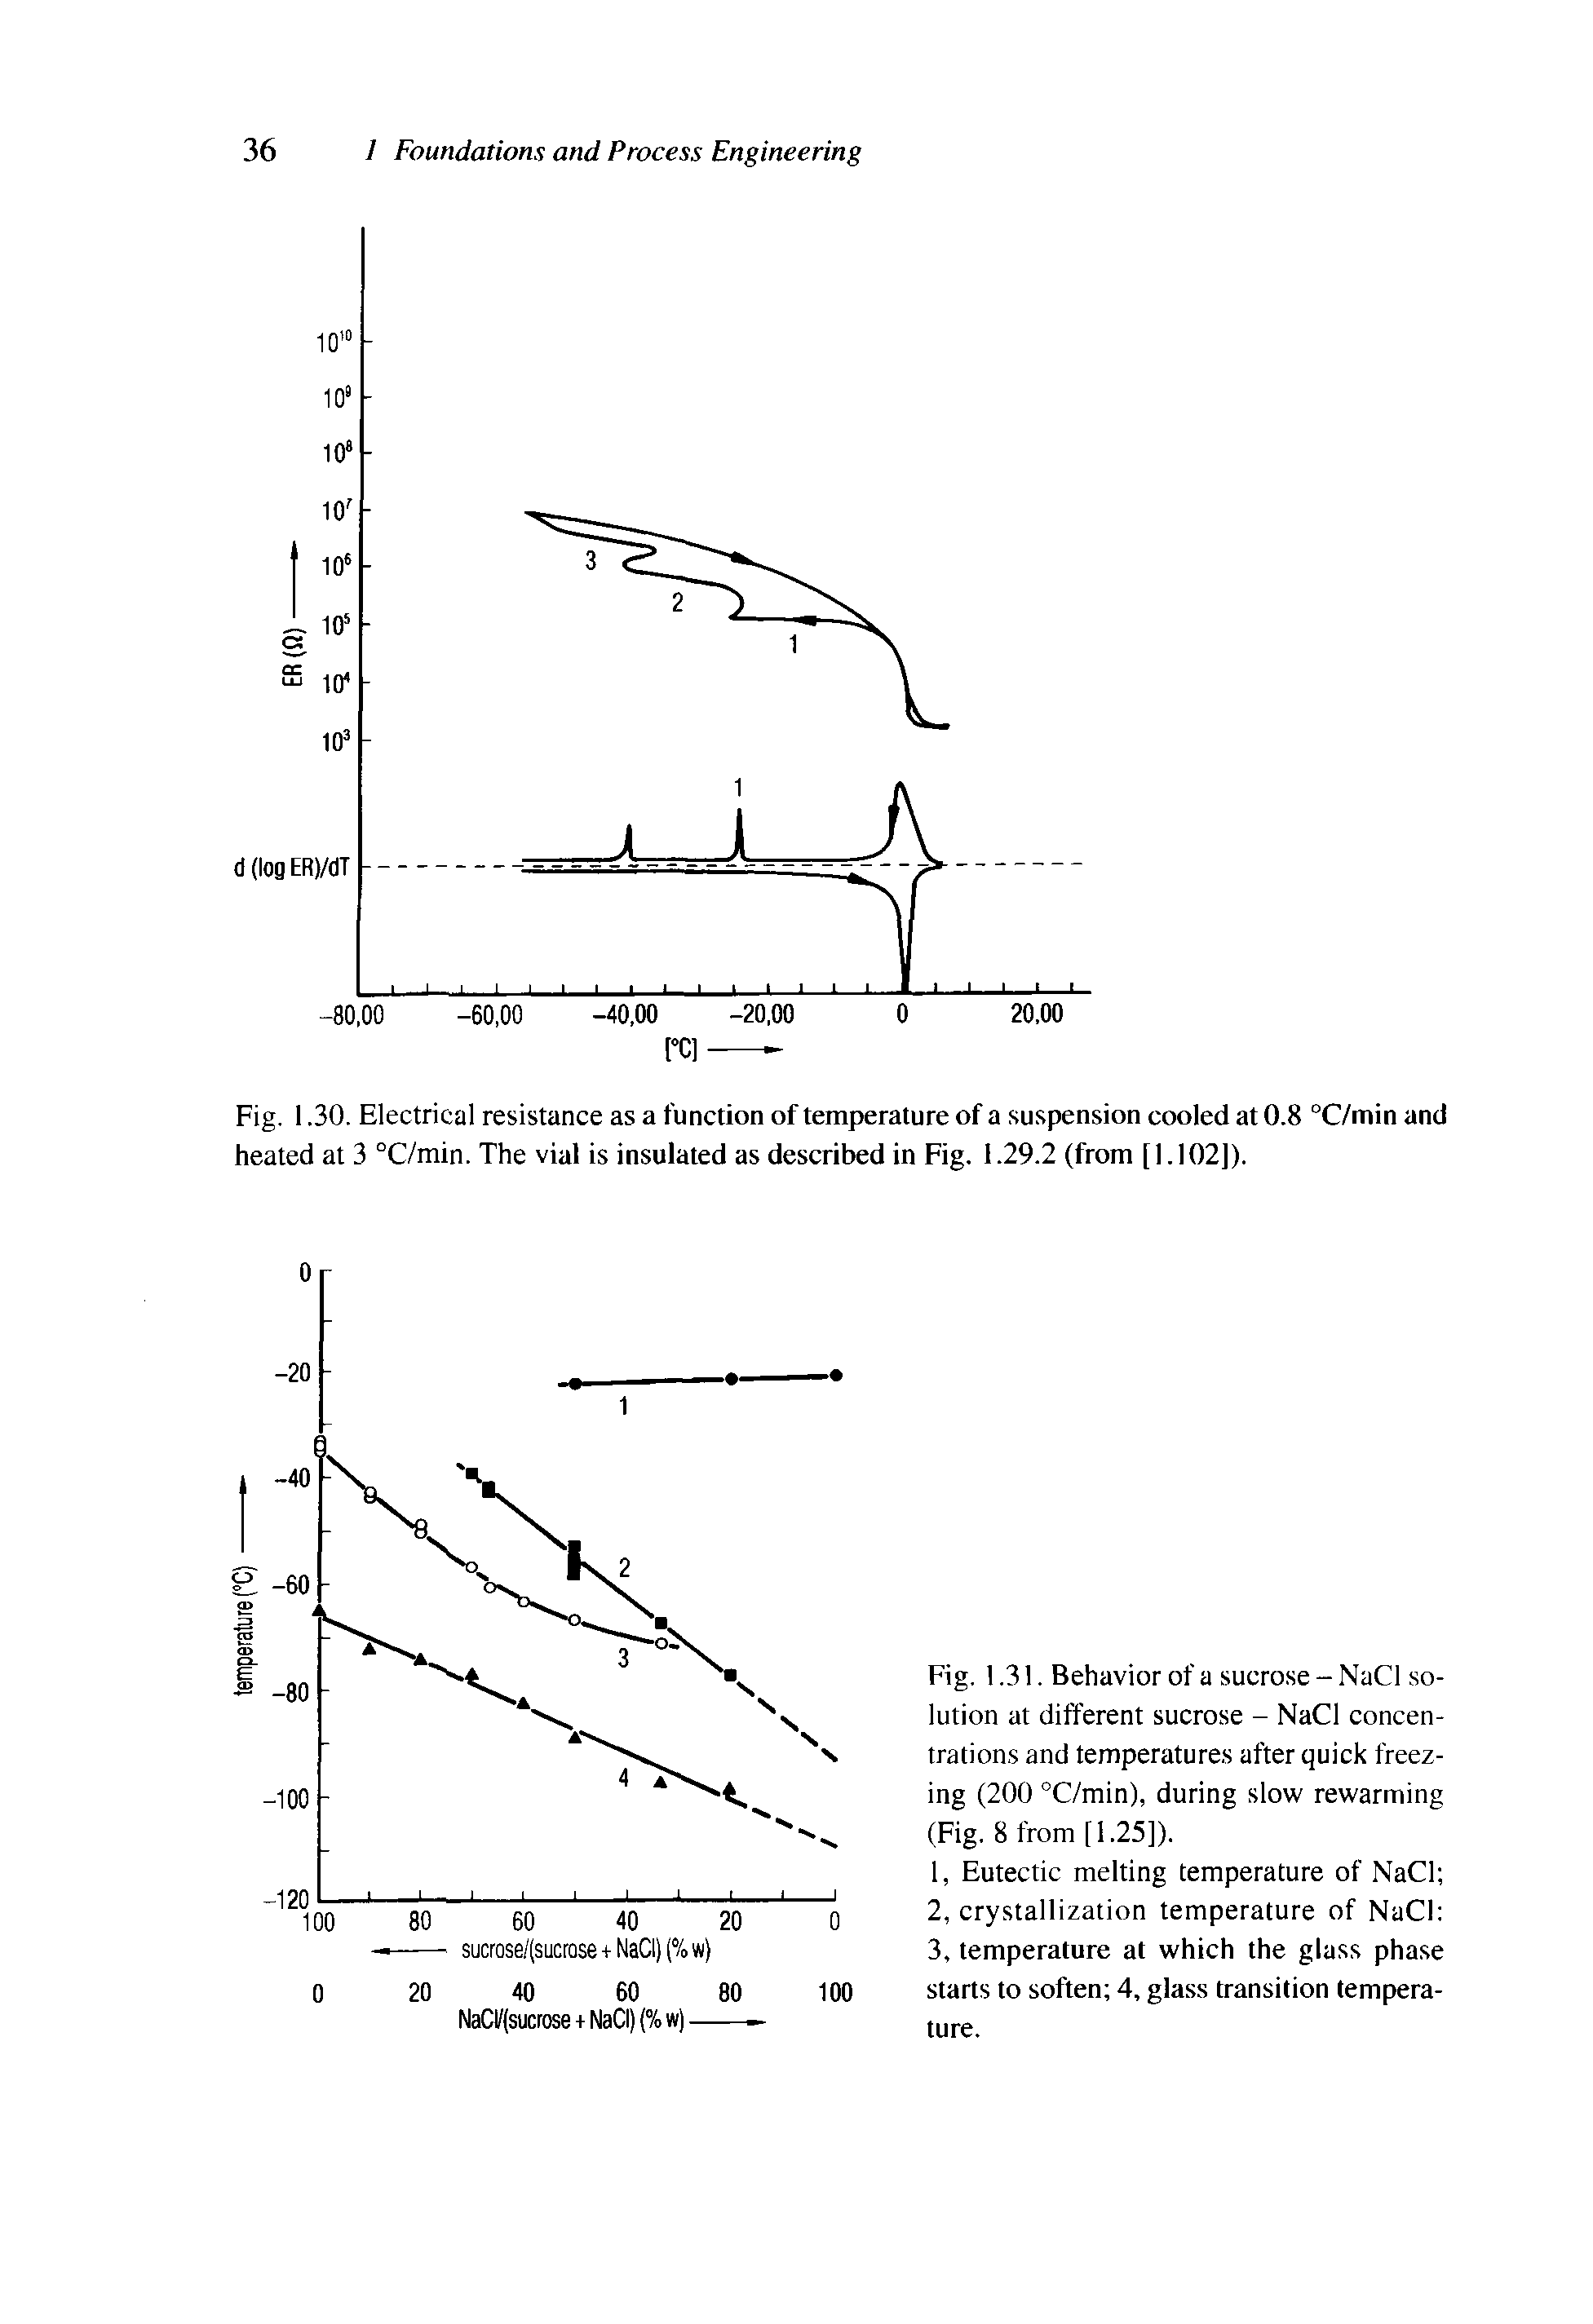 Fig. 1.31. Behavior of a sucrose - NaCI solution at different sucrose - NaCI concentrations and temperatures after quick freezing (200 °C/min), during slow rewarming (Fig. 8 from [1.25]).